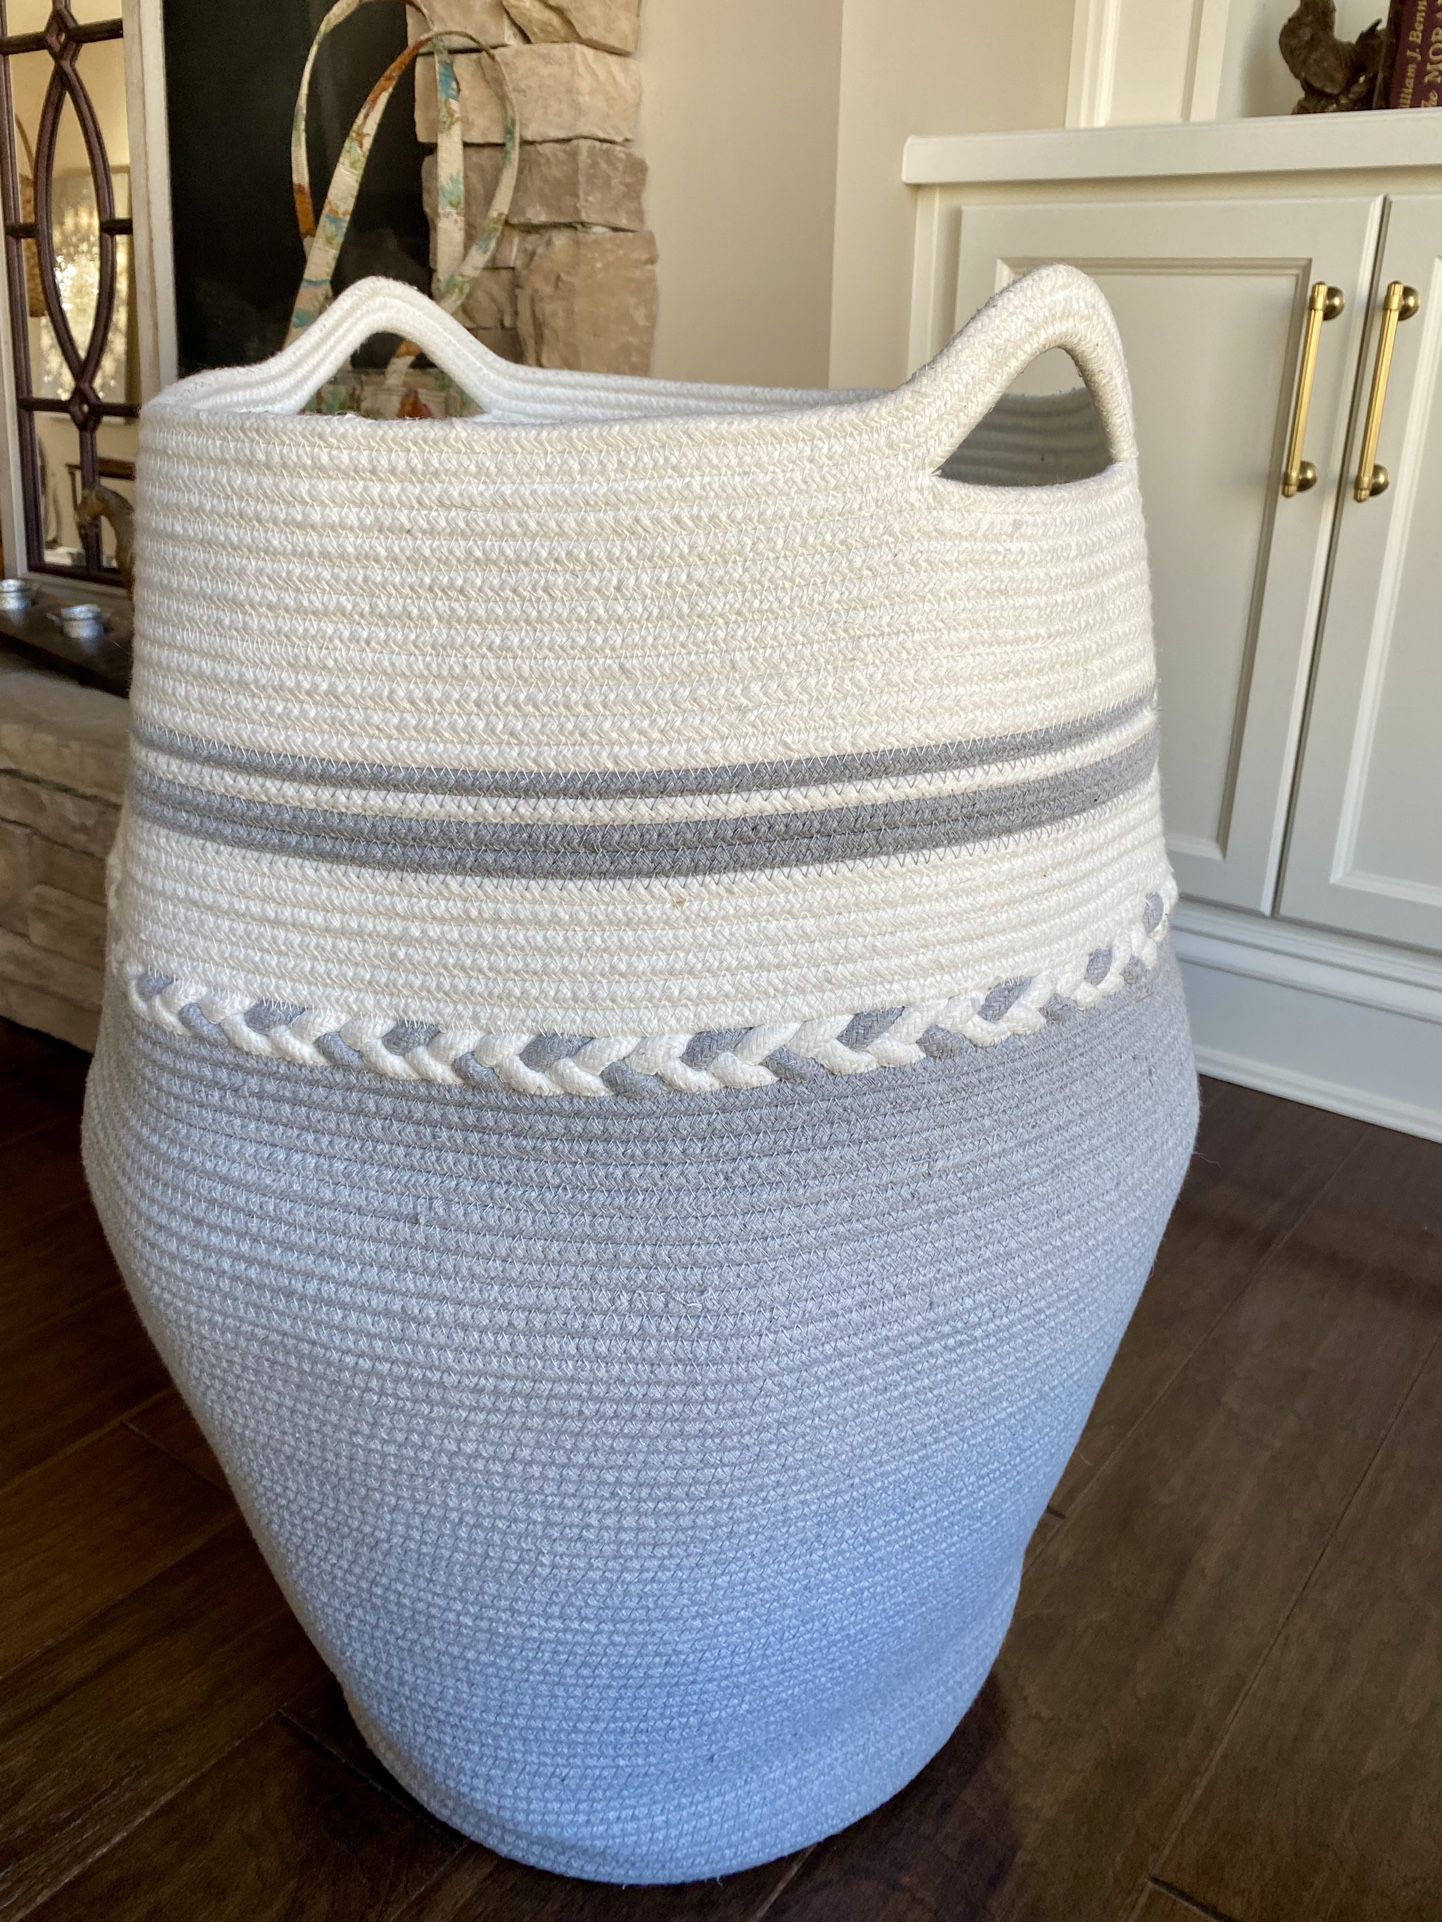 RETAIL $32 - Goodpick gray jute/cotton woven thread rope basket/storage (laundry, toys) 24”x16” - great condition